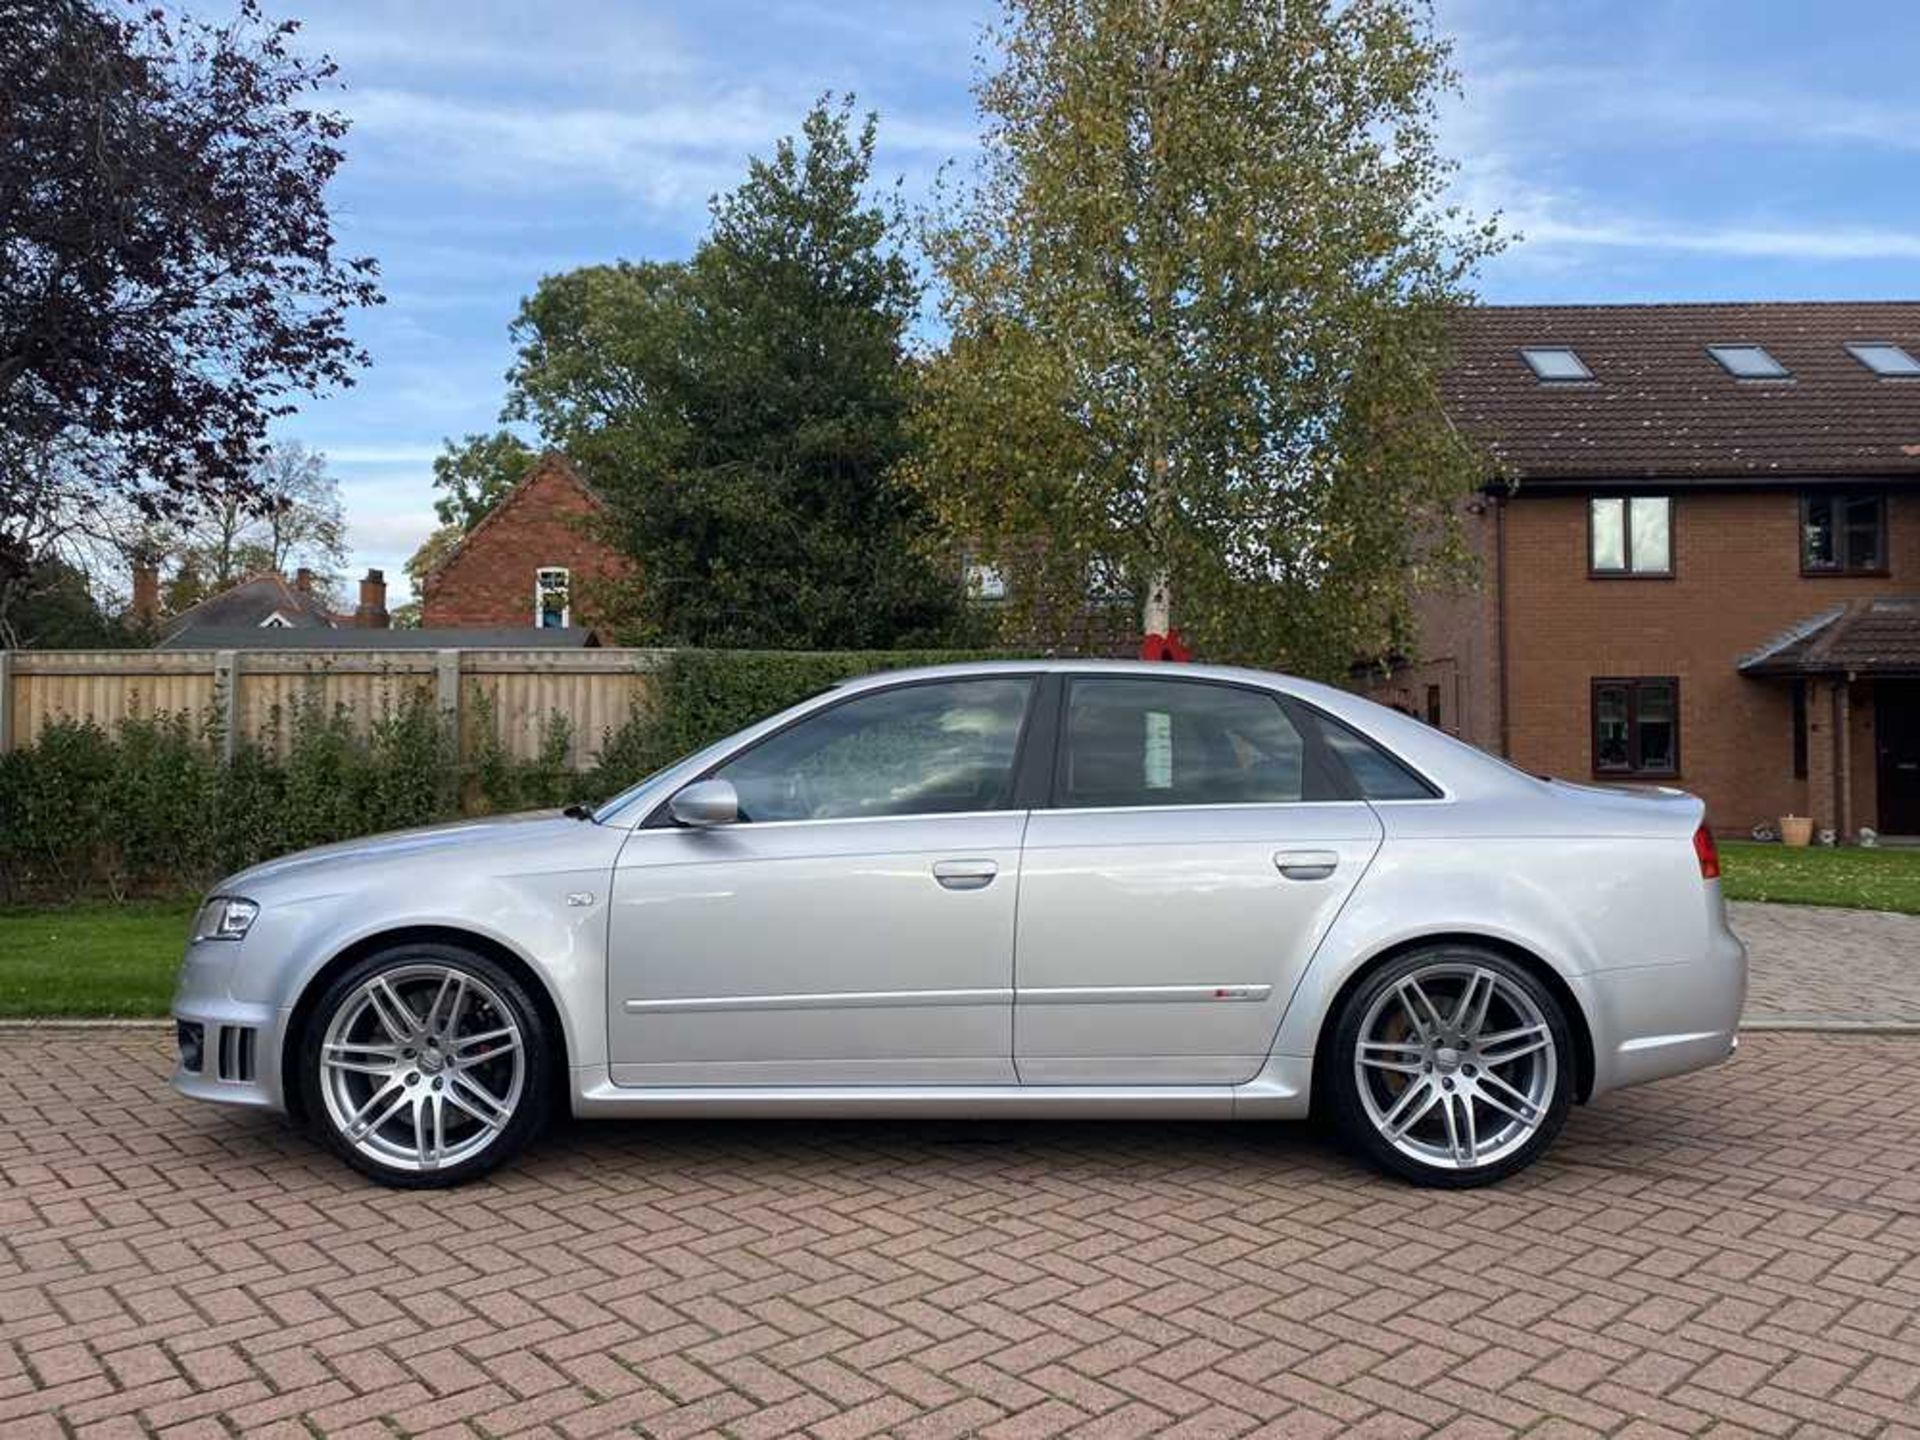 2007 Audi RS4 Saloon One owner and just c.60,000 miles from new - Image 10 of 86